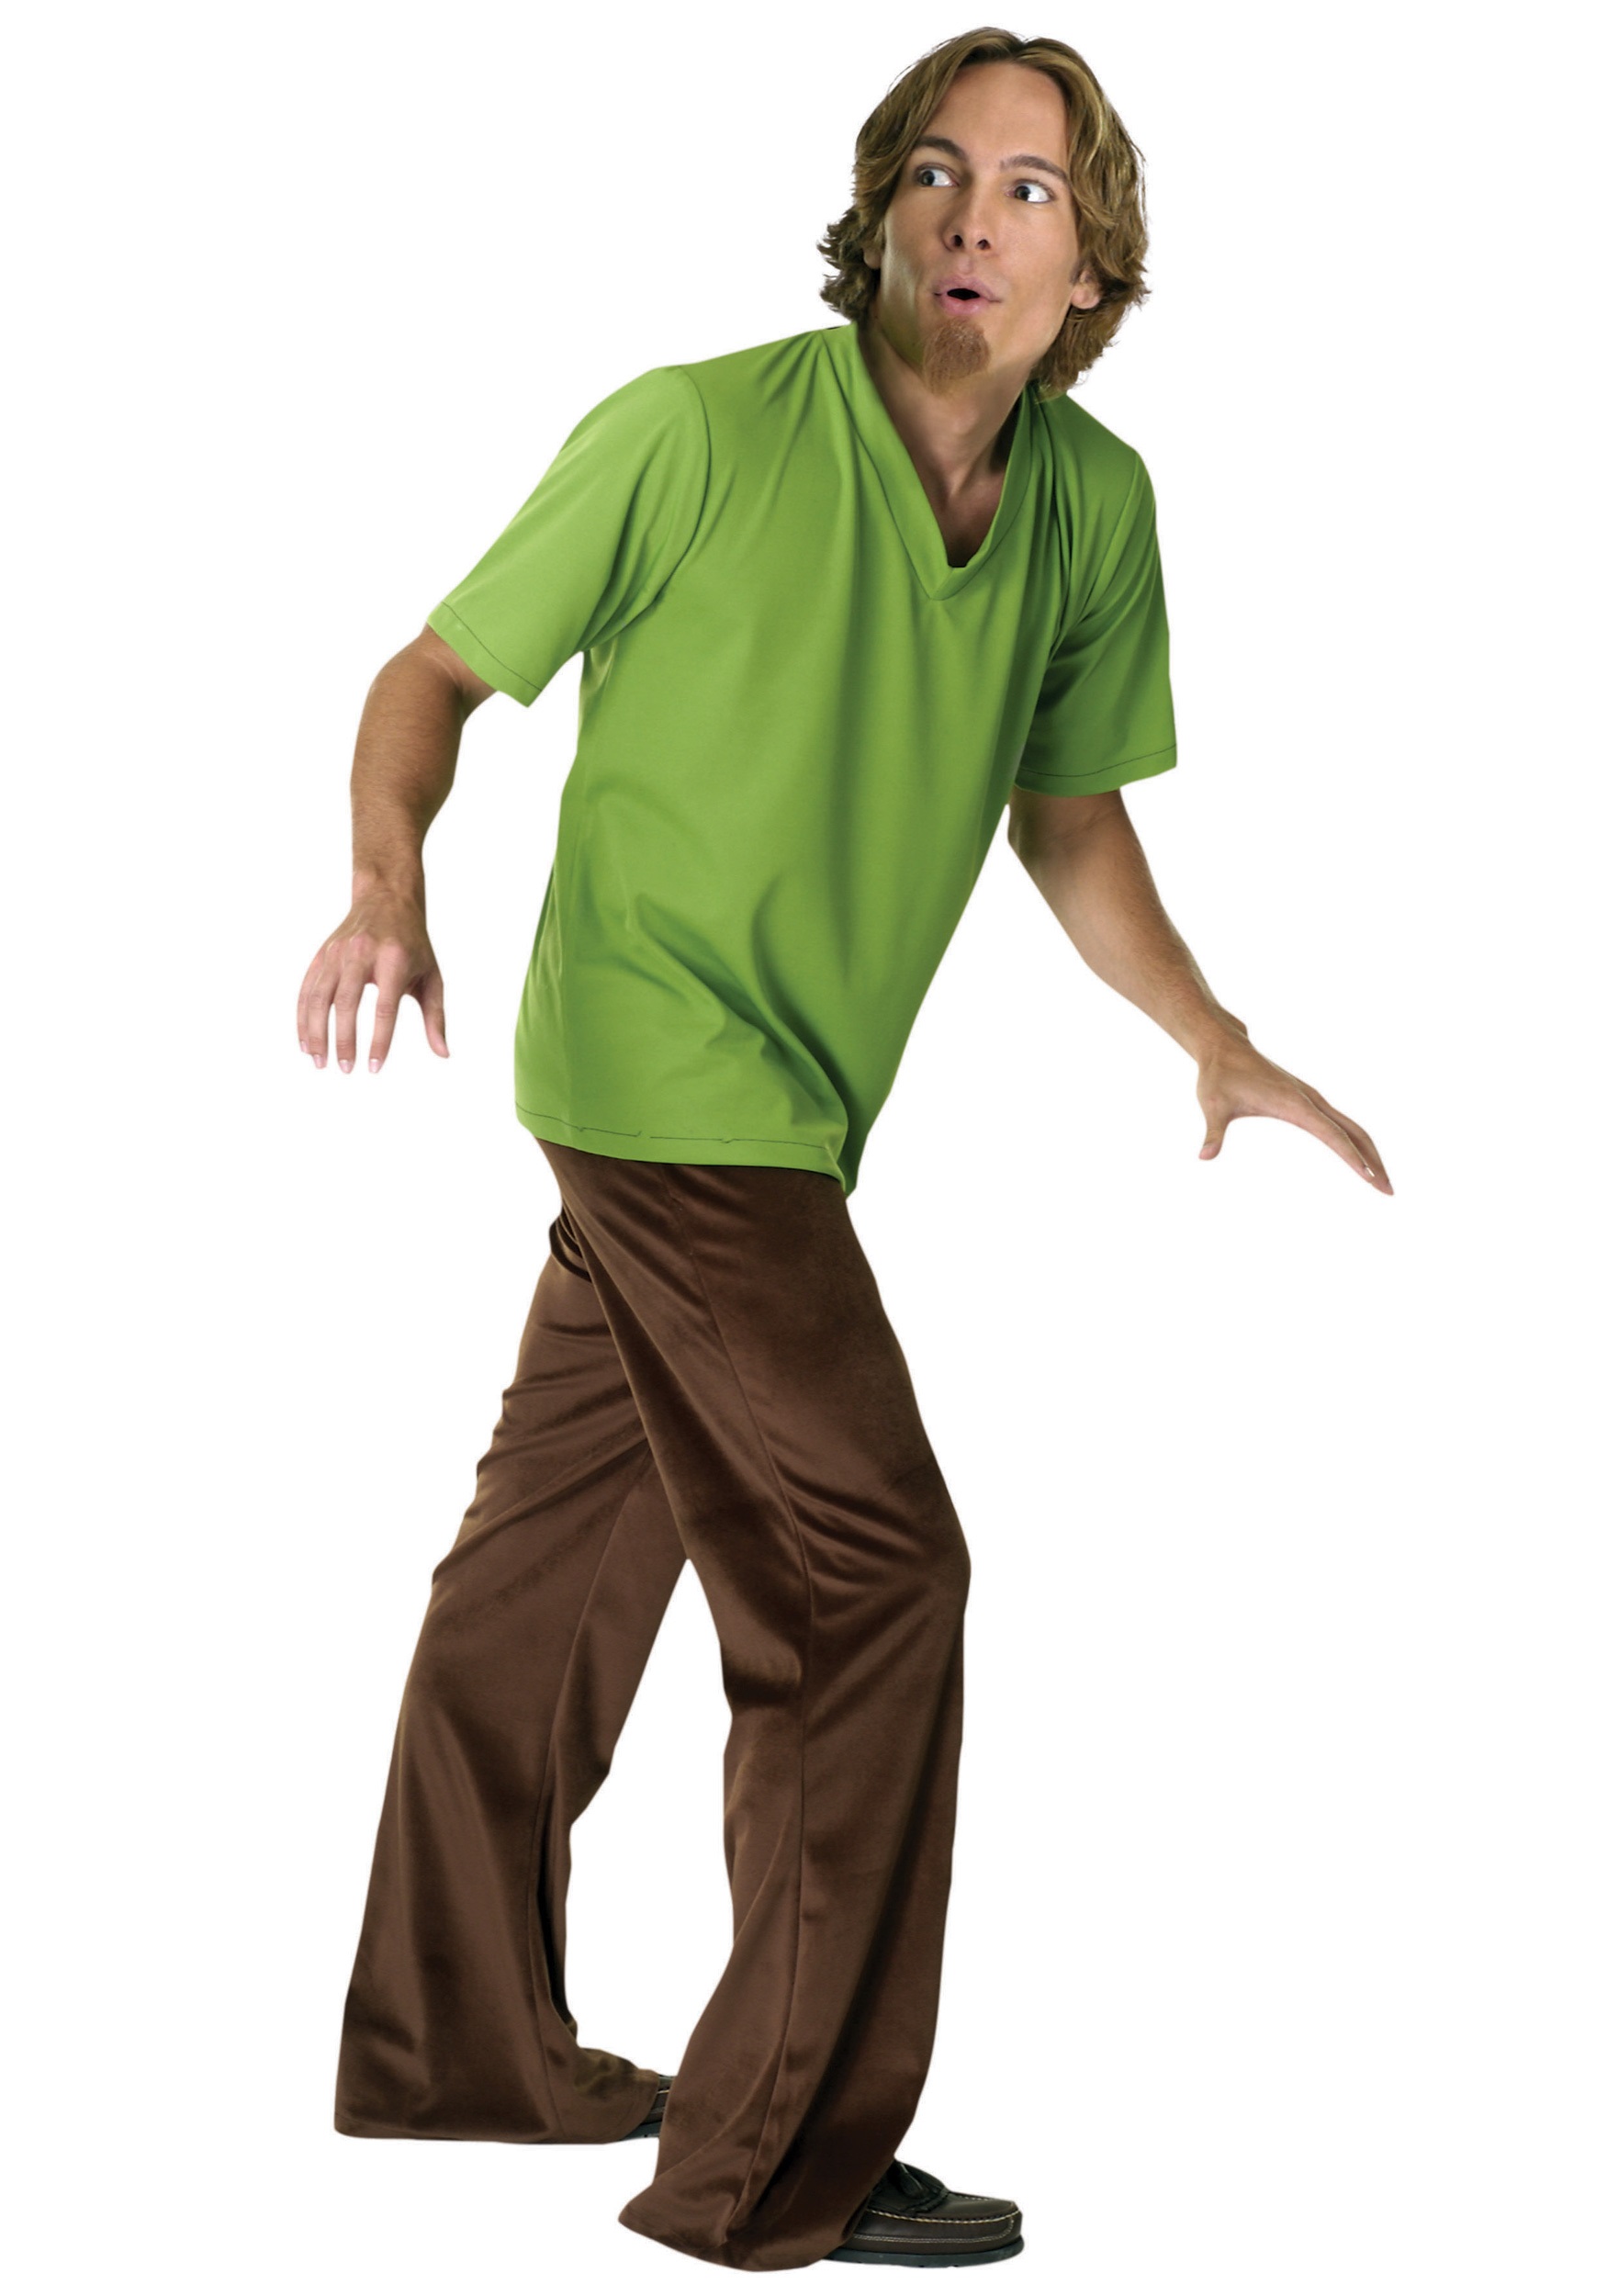 Image of Adult Shaggy Costume - Adult Scooby Doo Costumes ID RU16498-ST